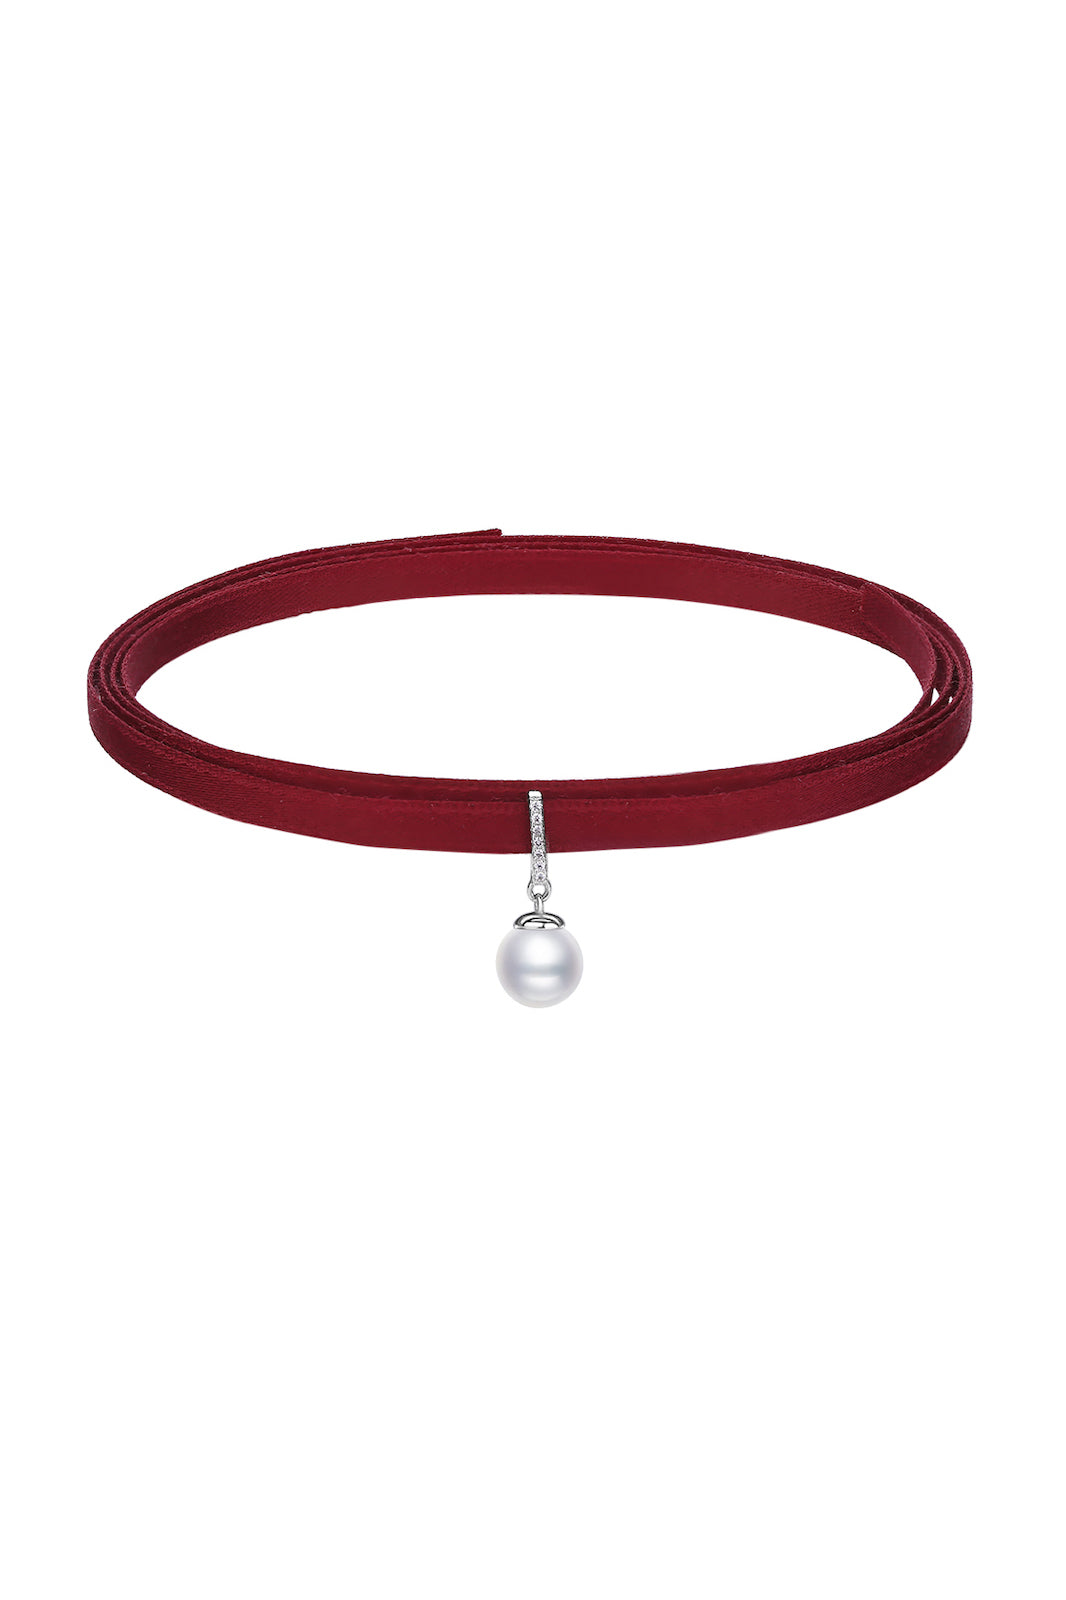 Pearl Choker with Burgundy Red Silk Adjustable Band - AVILIO SILVER JEWELLERY 